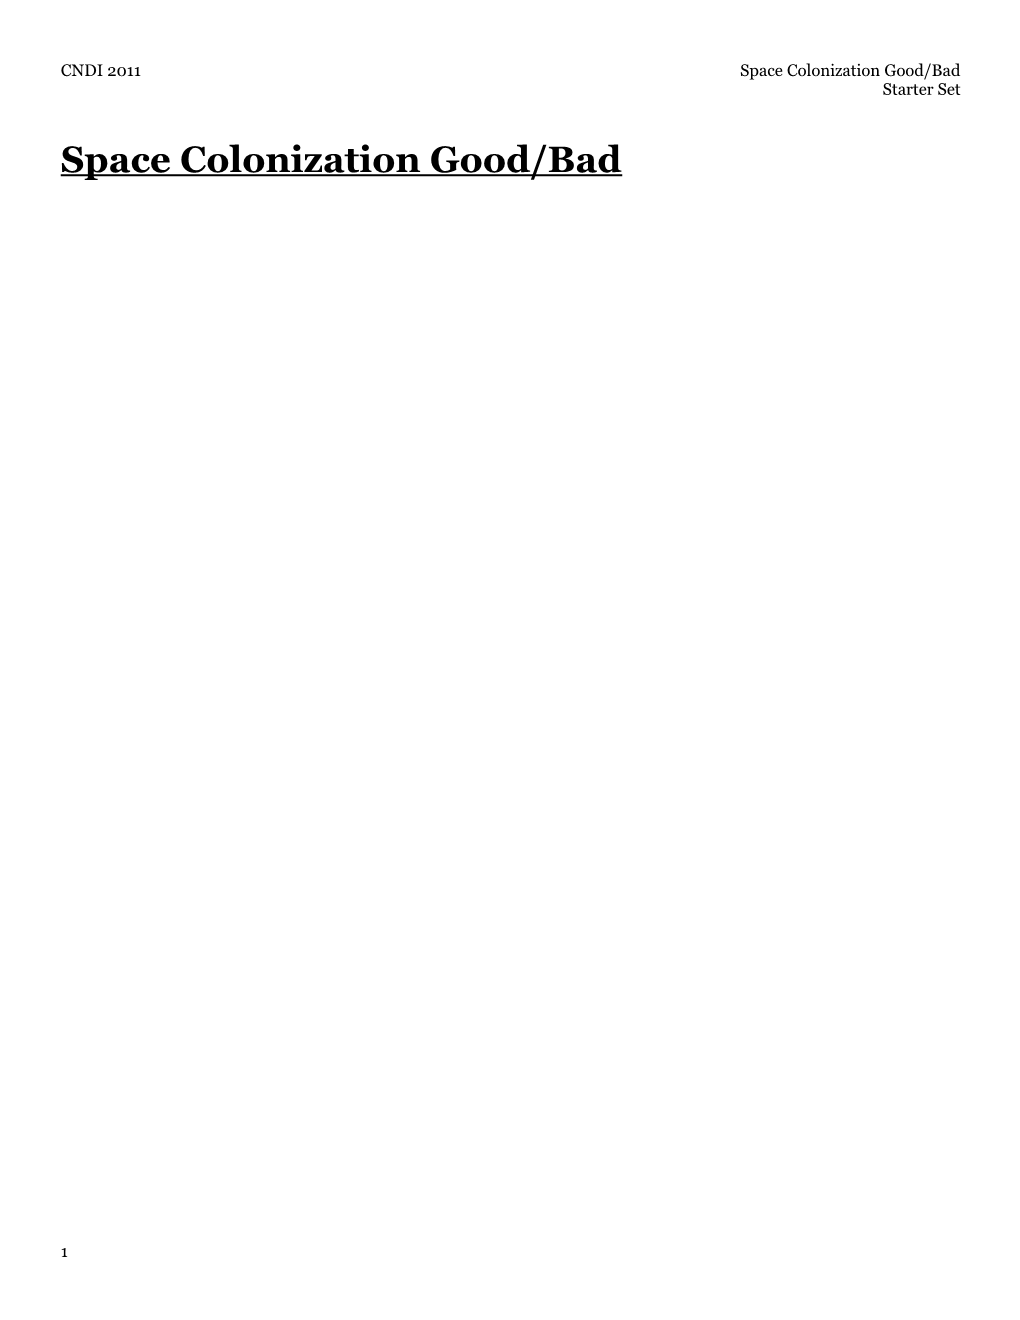 Space Colonization Good/Bad